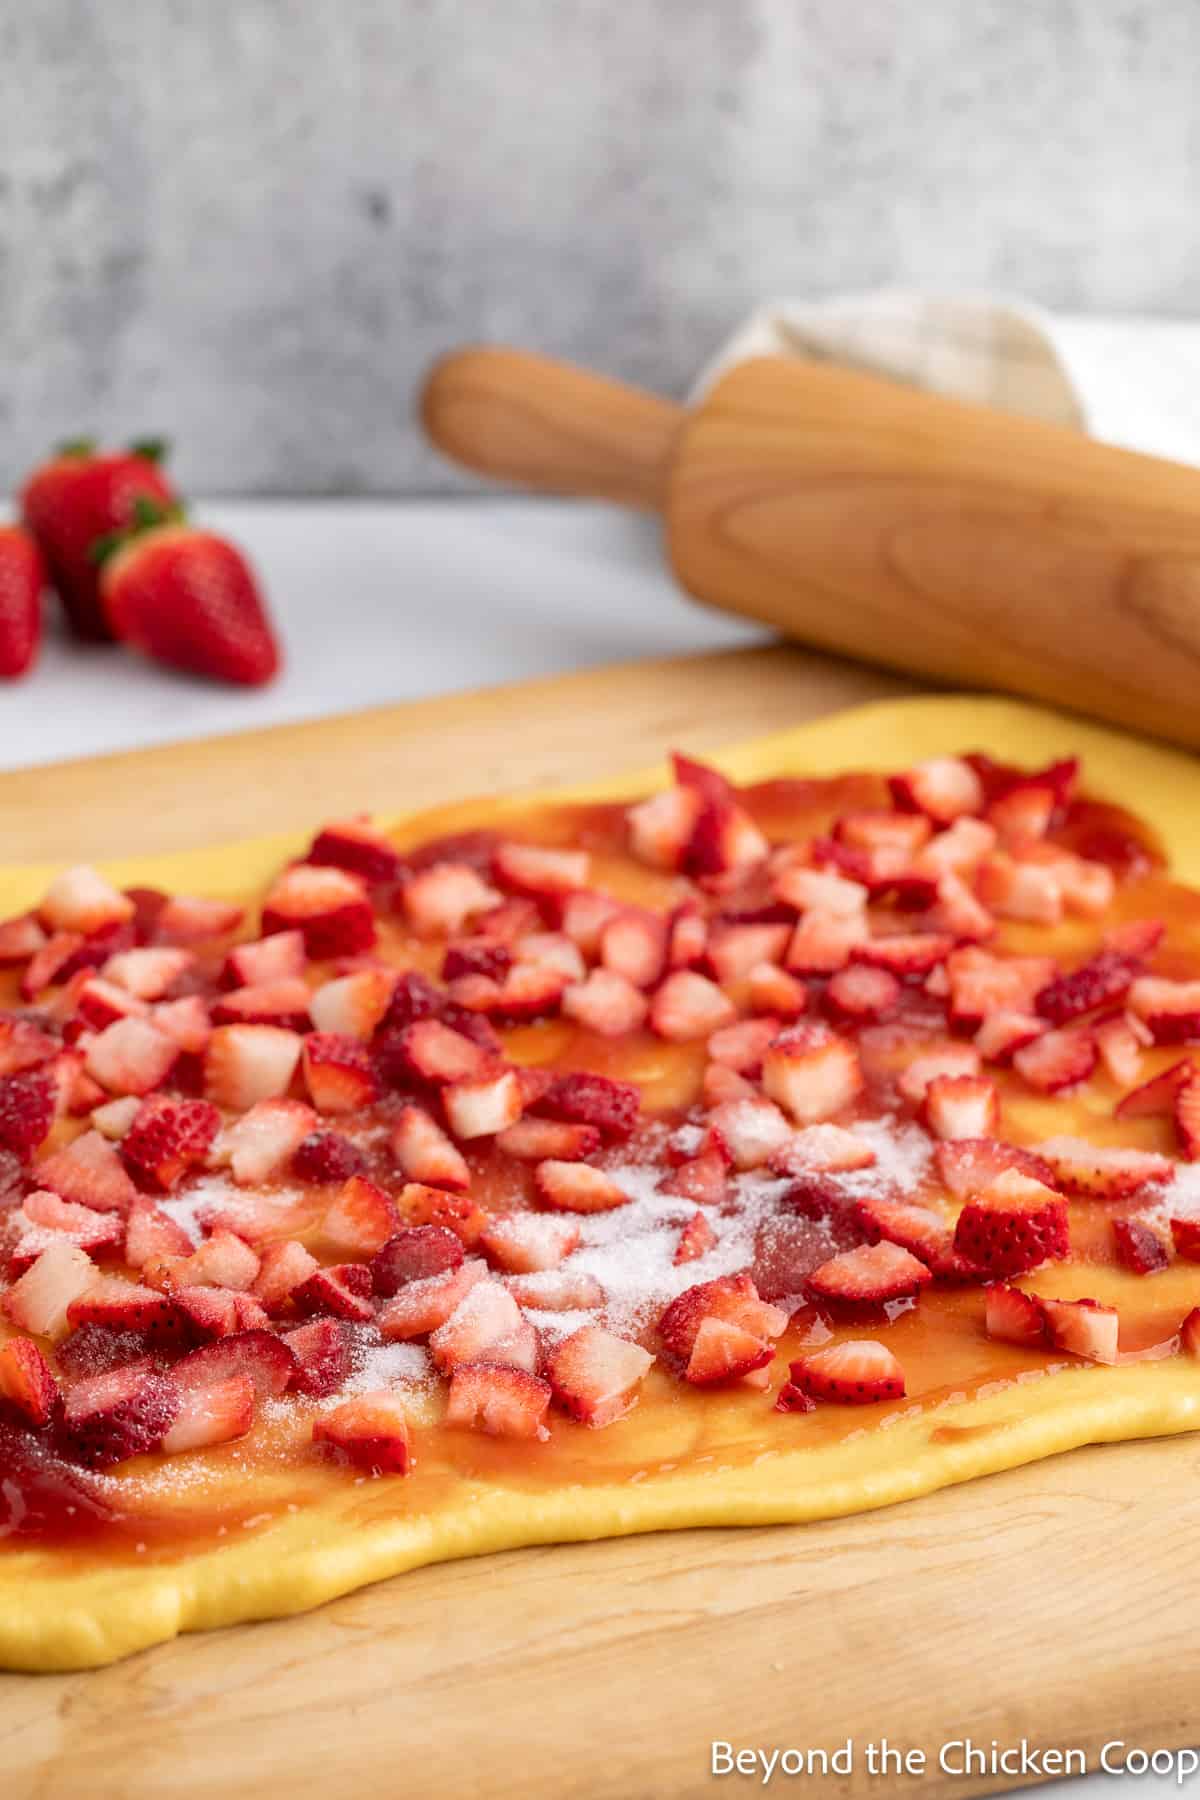 Cut strawberries on top of rolled out dough. 